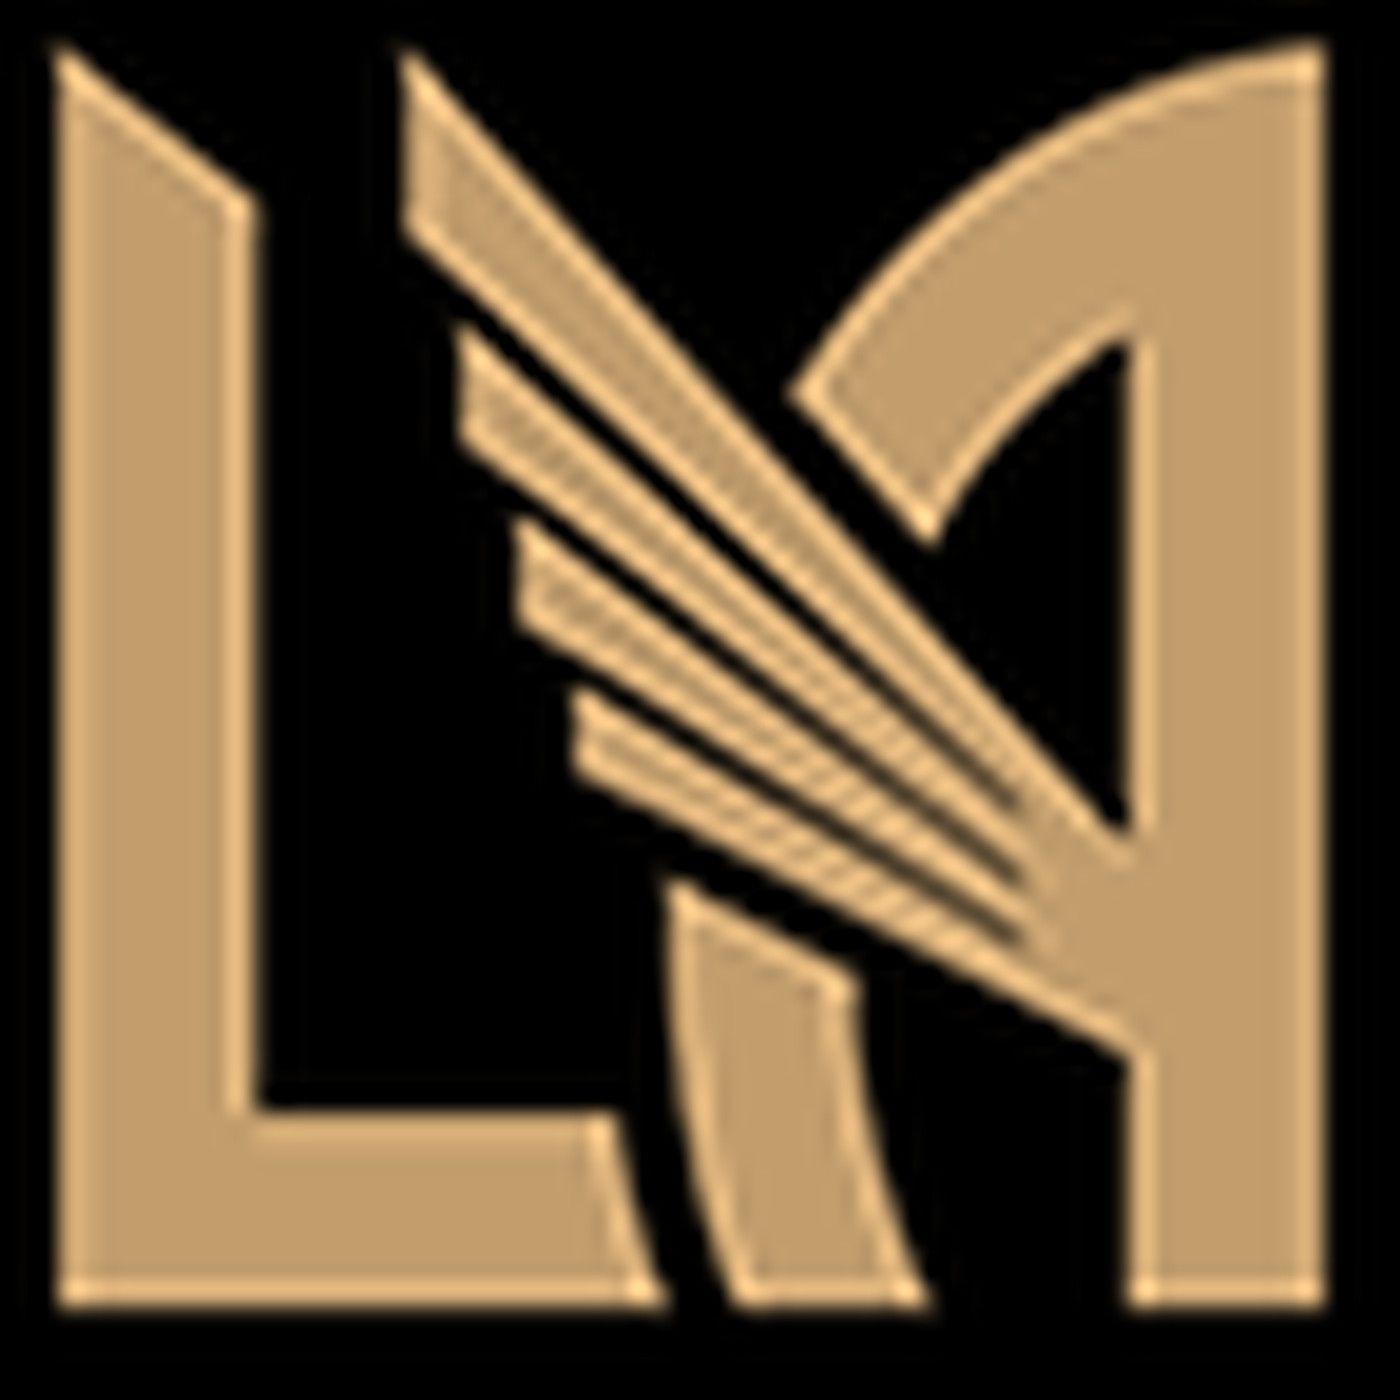 Lafc Logo - Major League Soccer file trademarks on LAFC Wings and The Wings